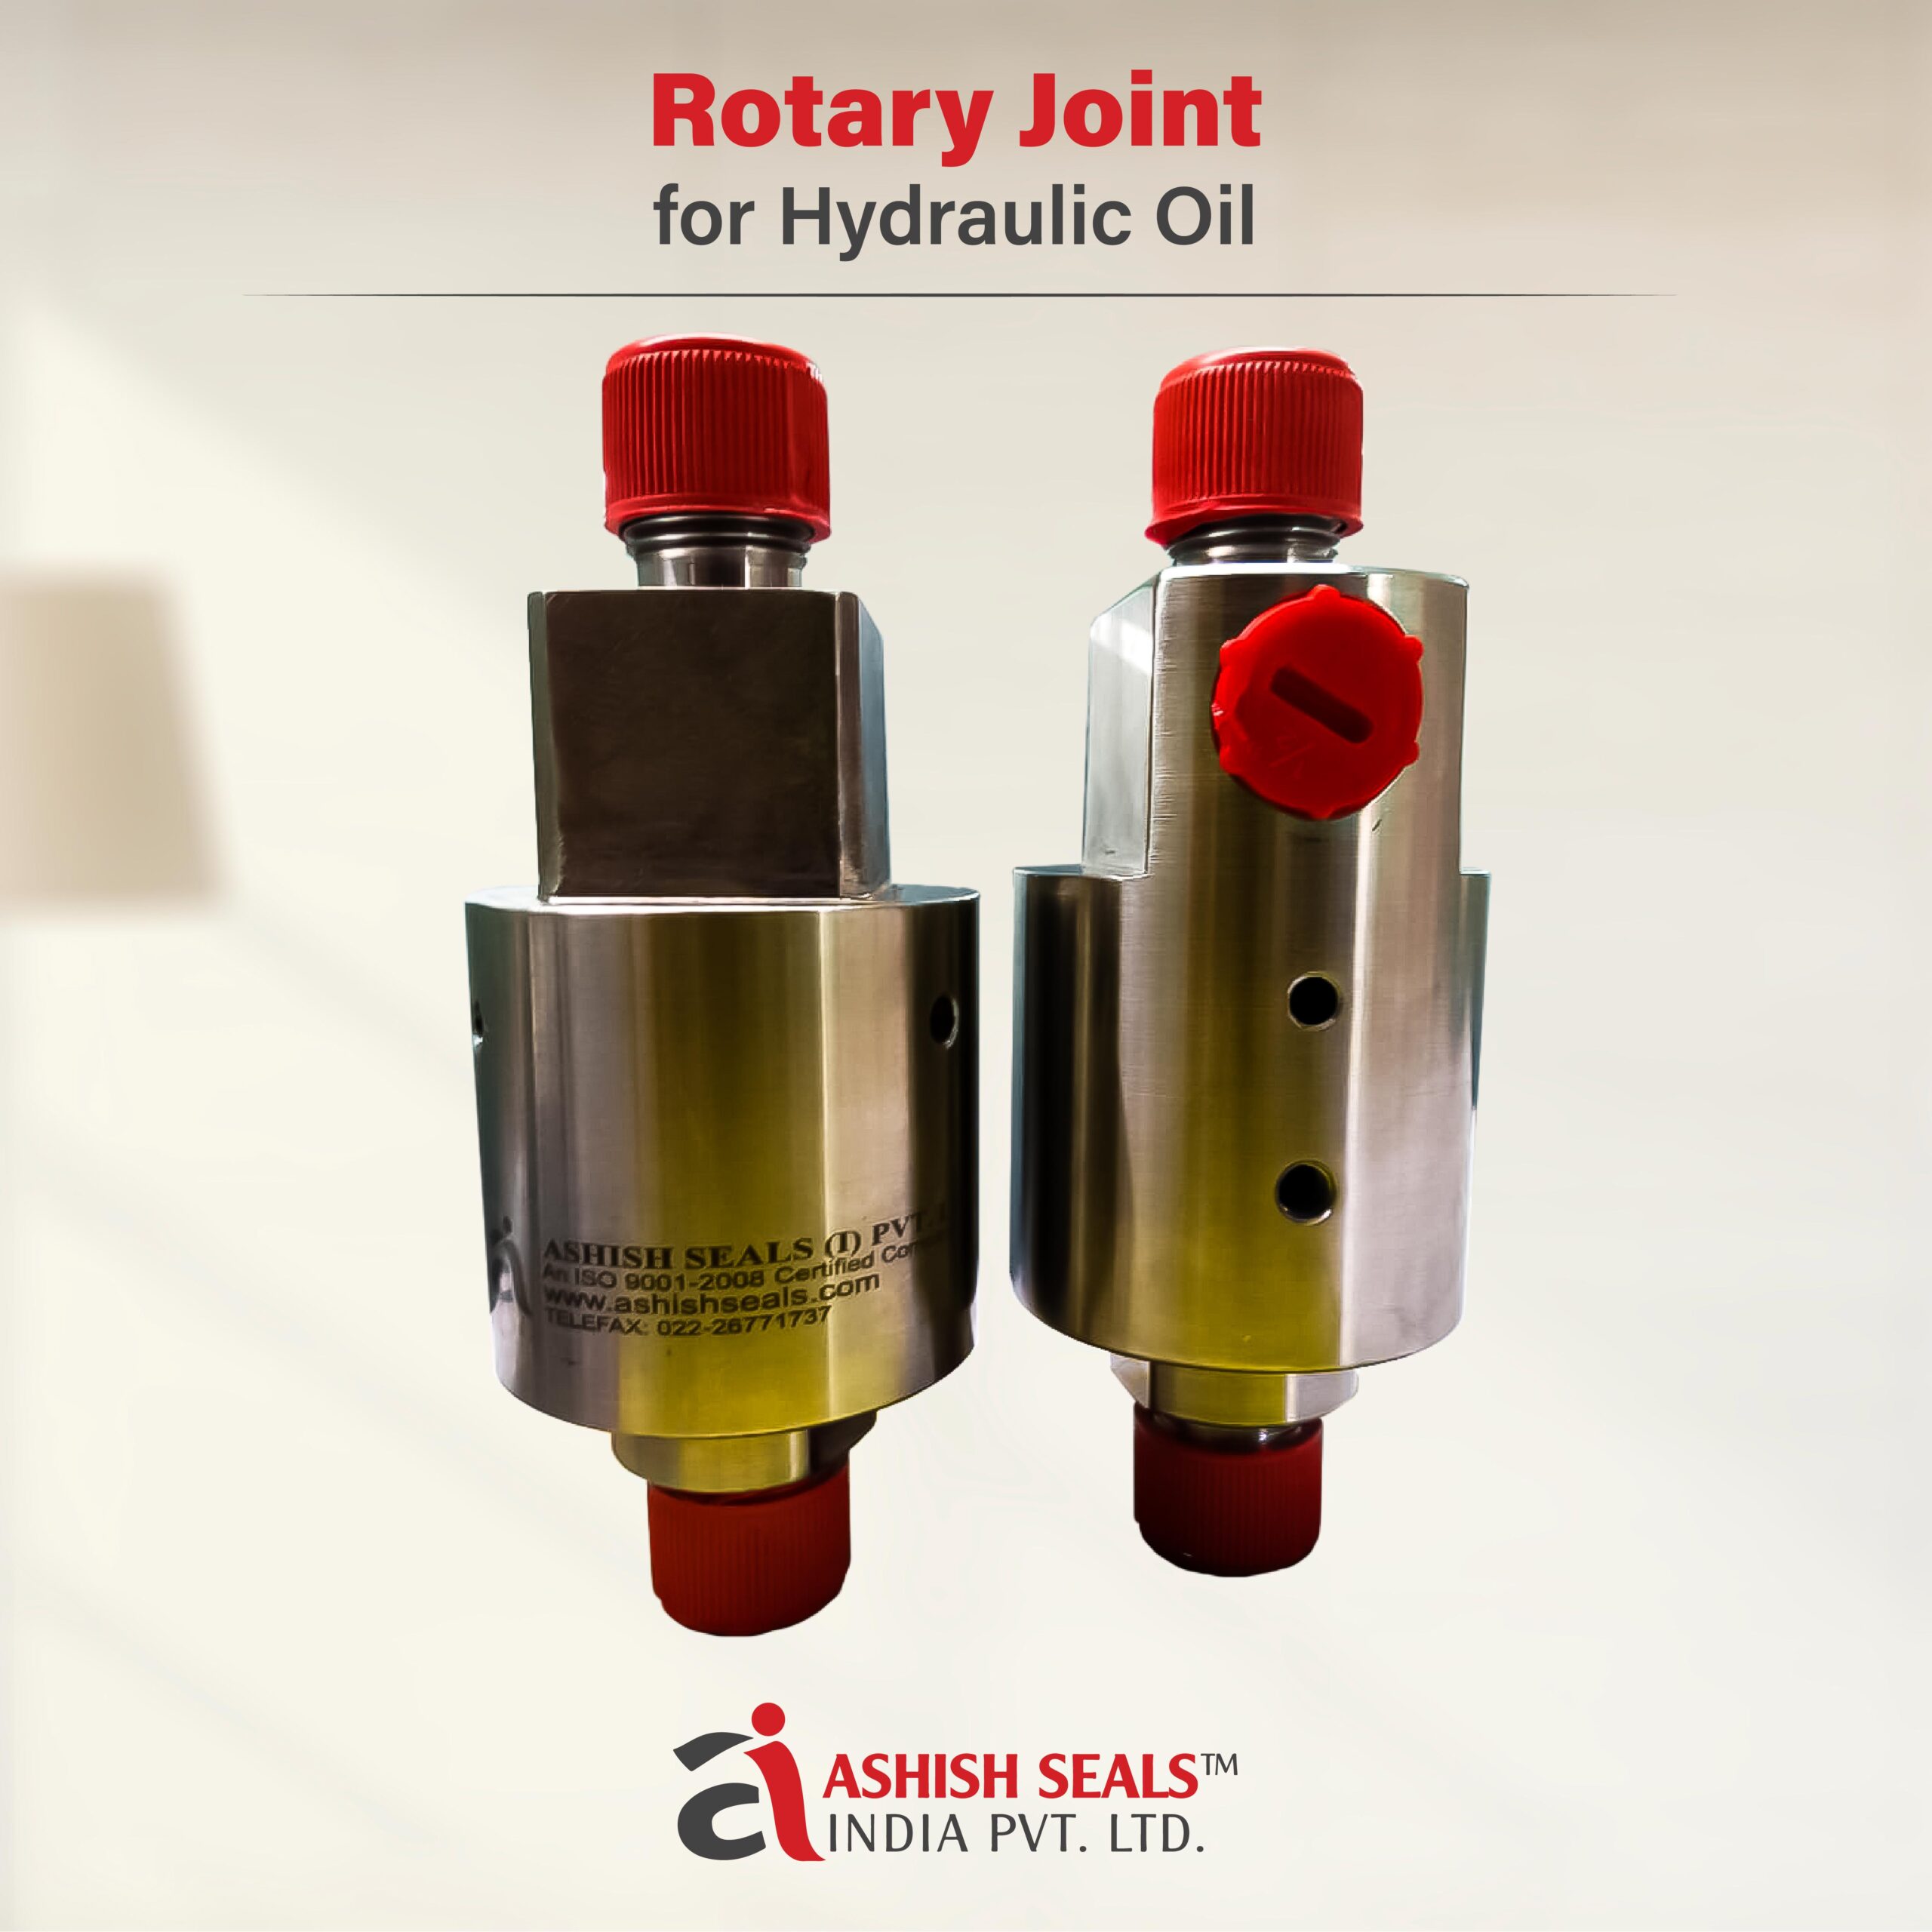 Rotary Joints for Hydraulic Oil